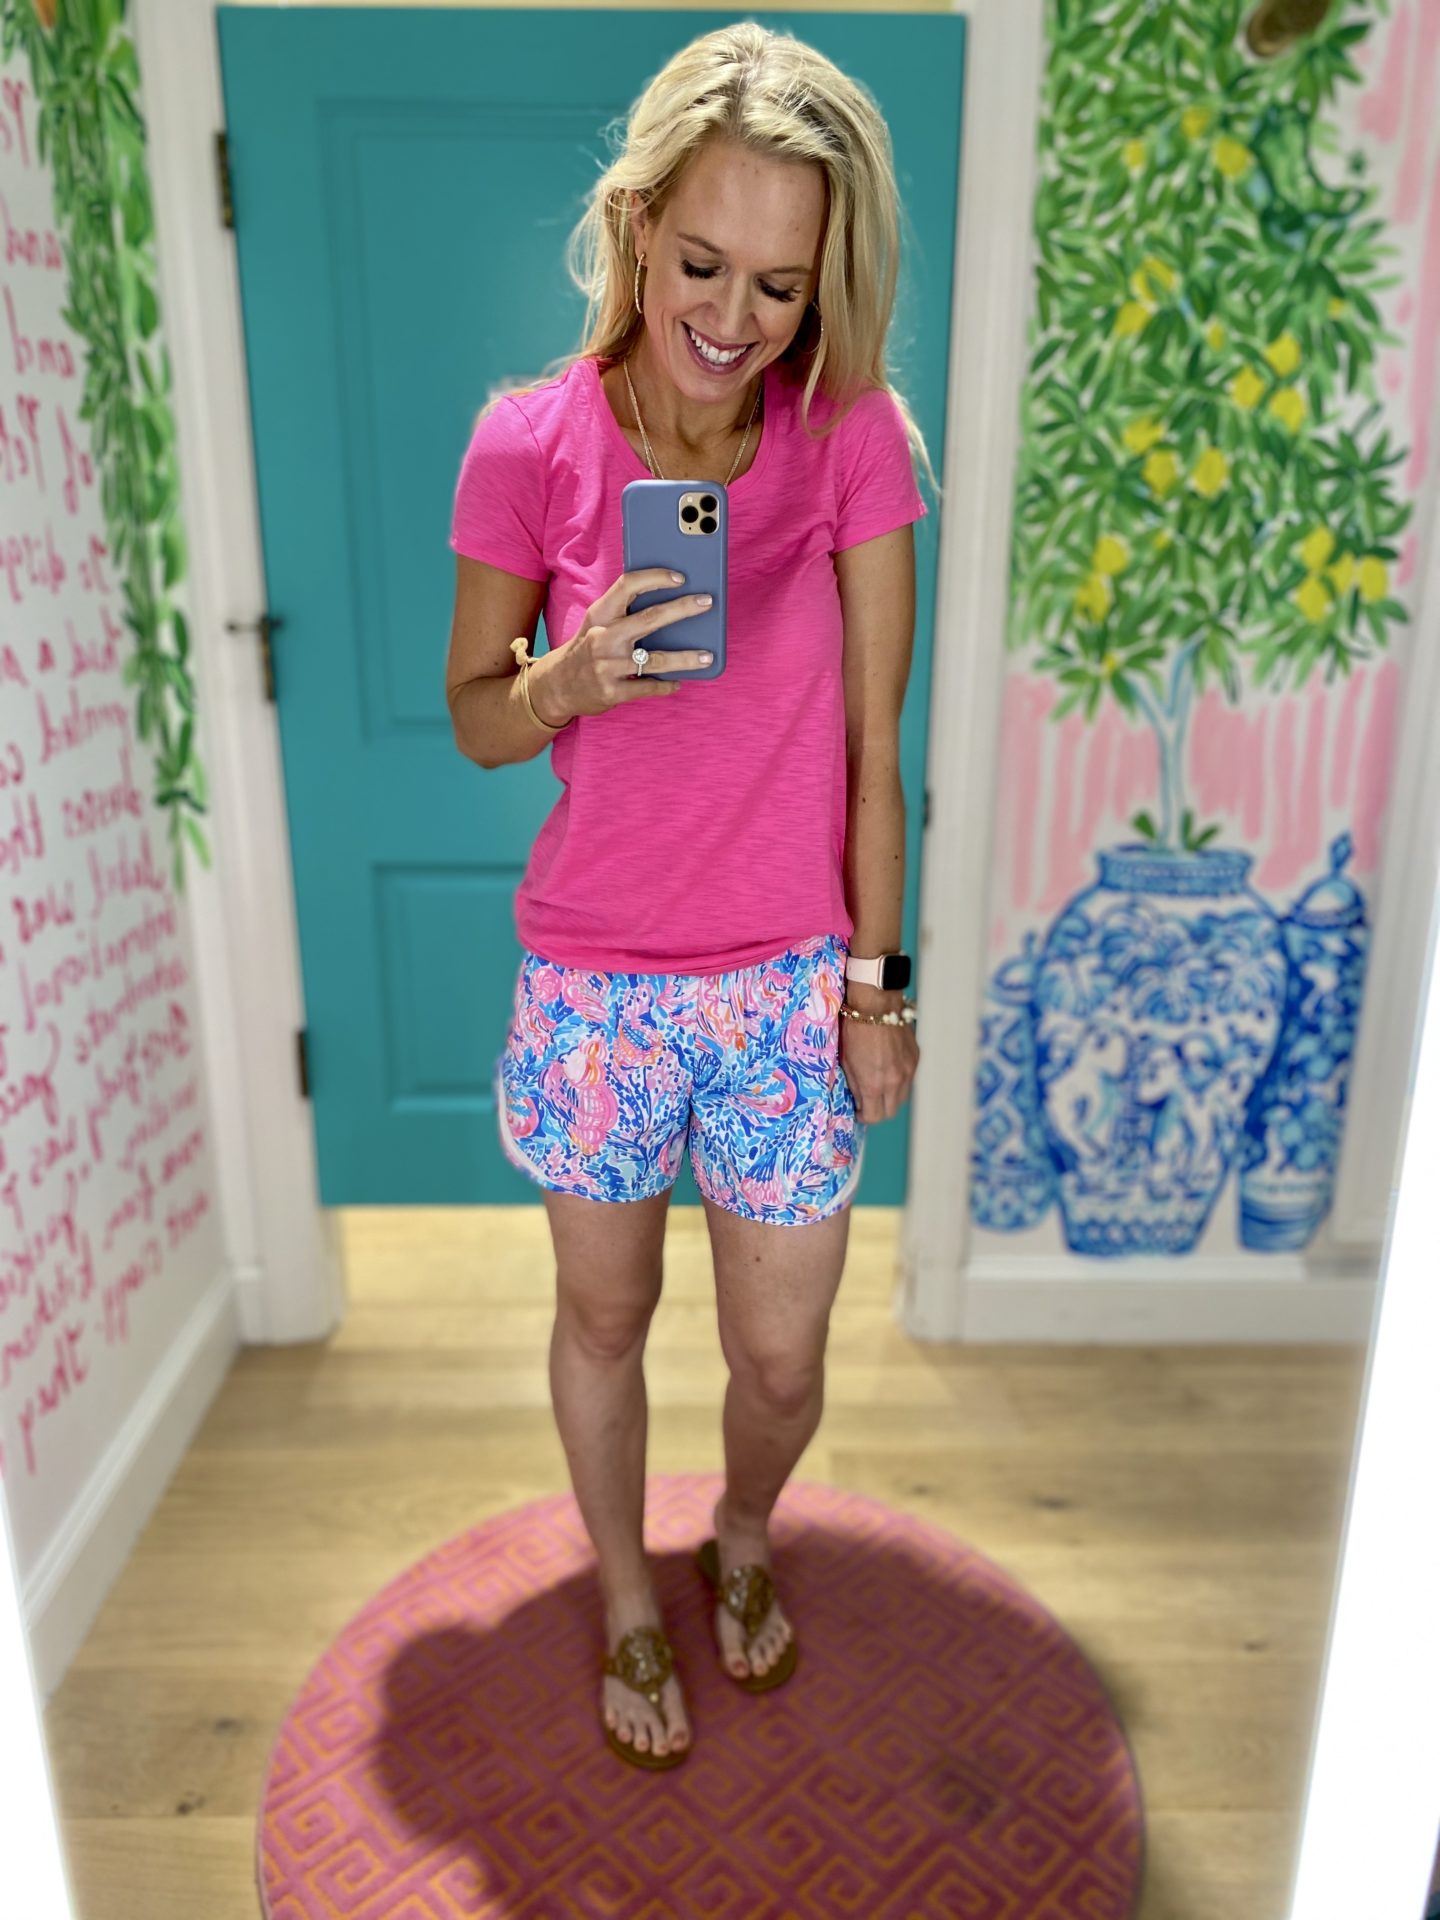 2020 Lilly Pulitzer After Party Sale talk:  Lilly Pulitzer favorites, After Party Sale tips, pricing estimates, other Lilly Pulitzer sales and a giveaway!